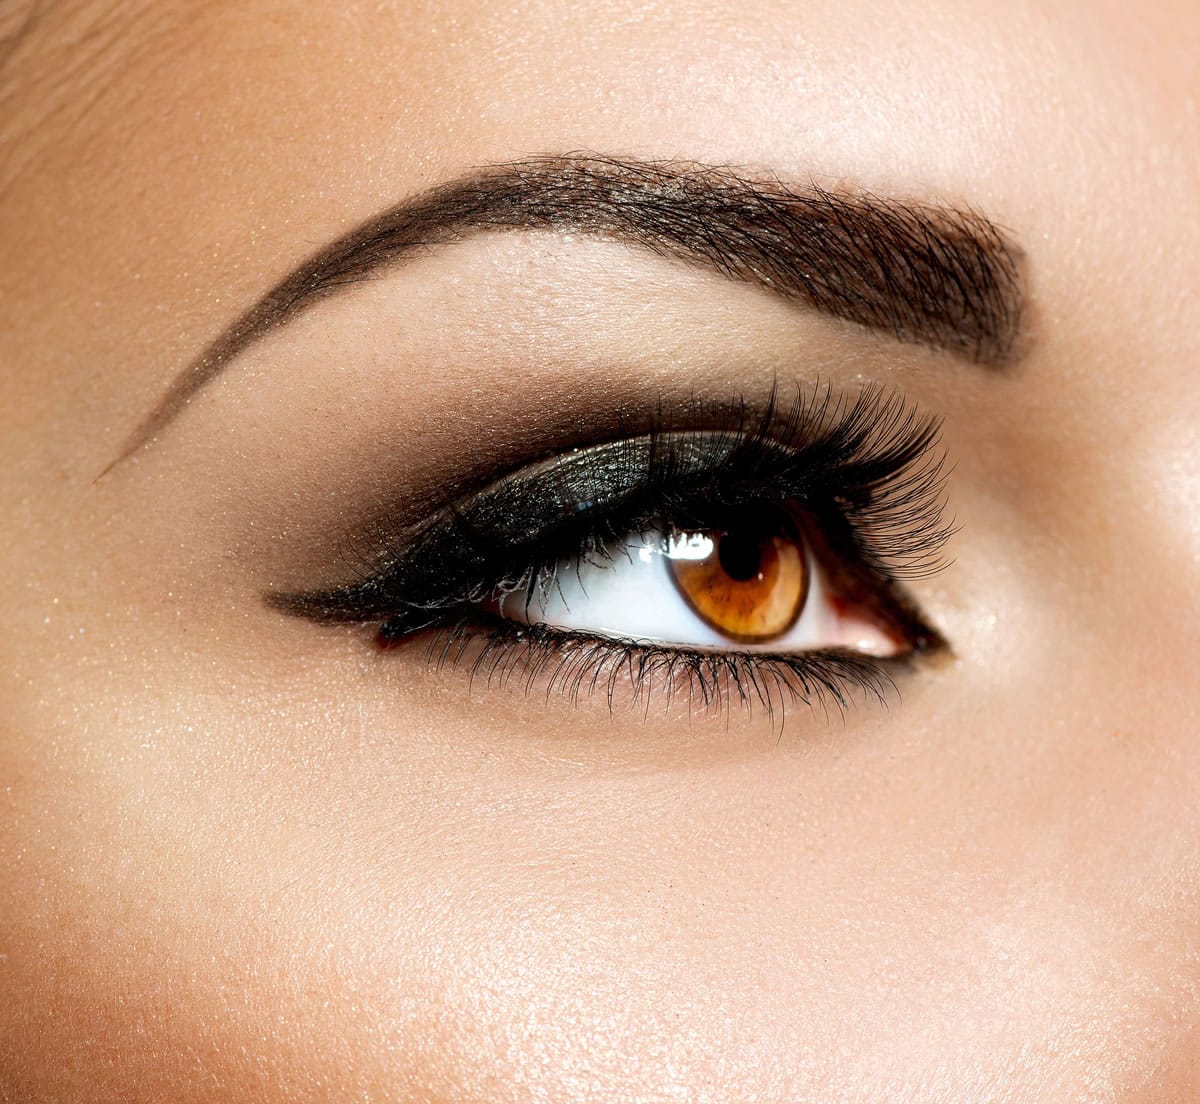 Fotolia
Follow these tips to create a smoky eyes look for the season.